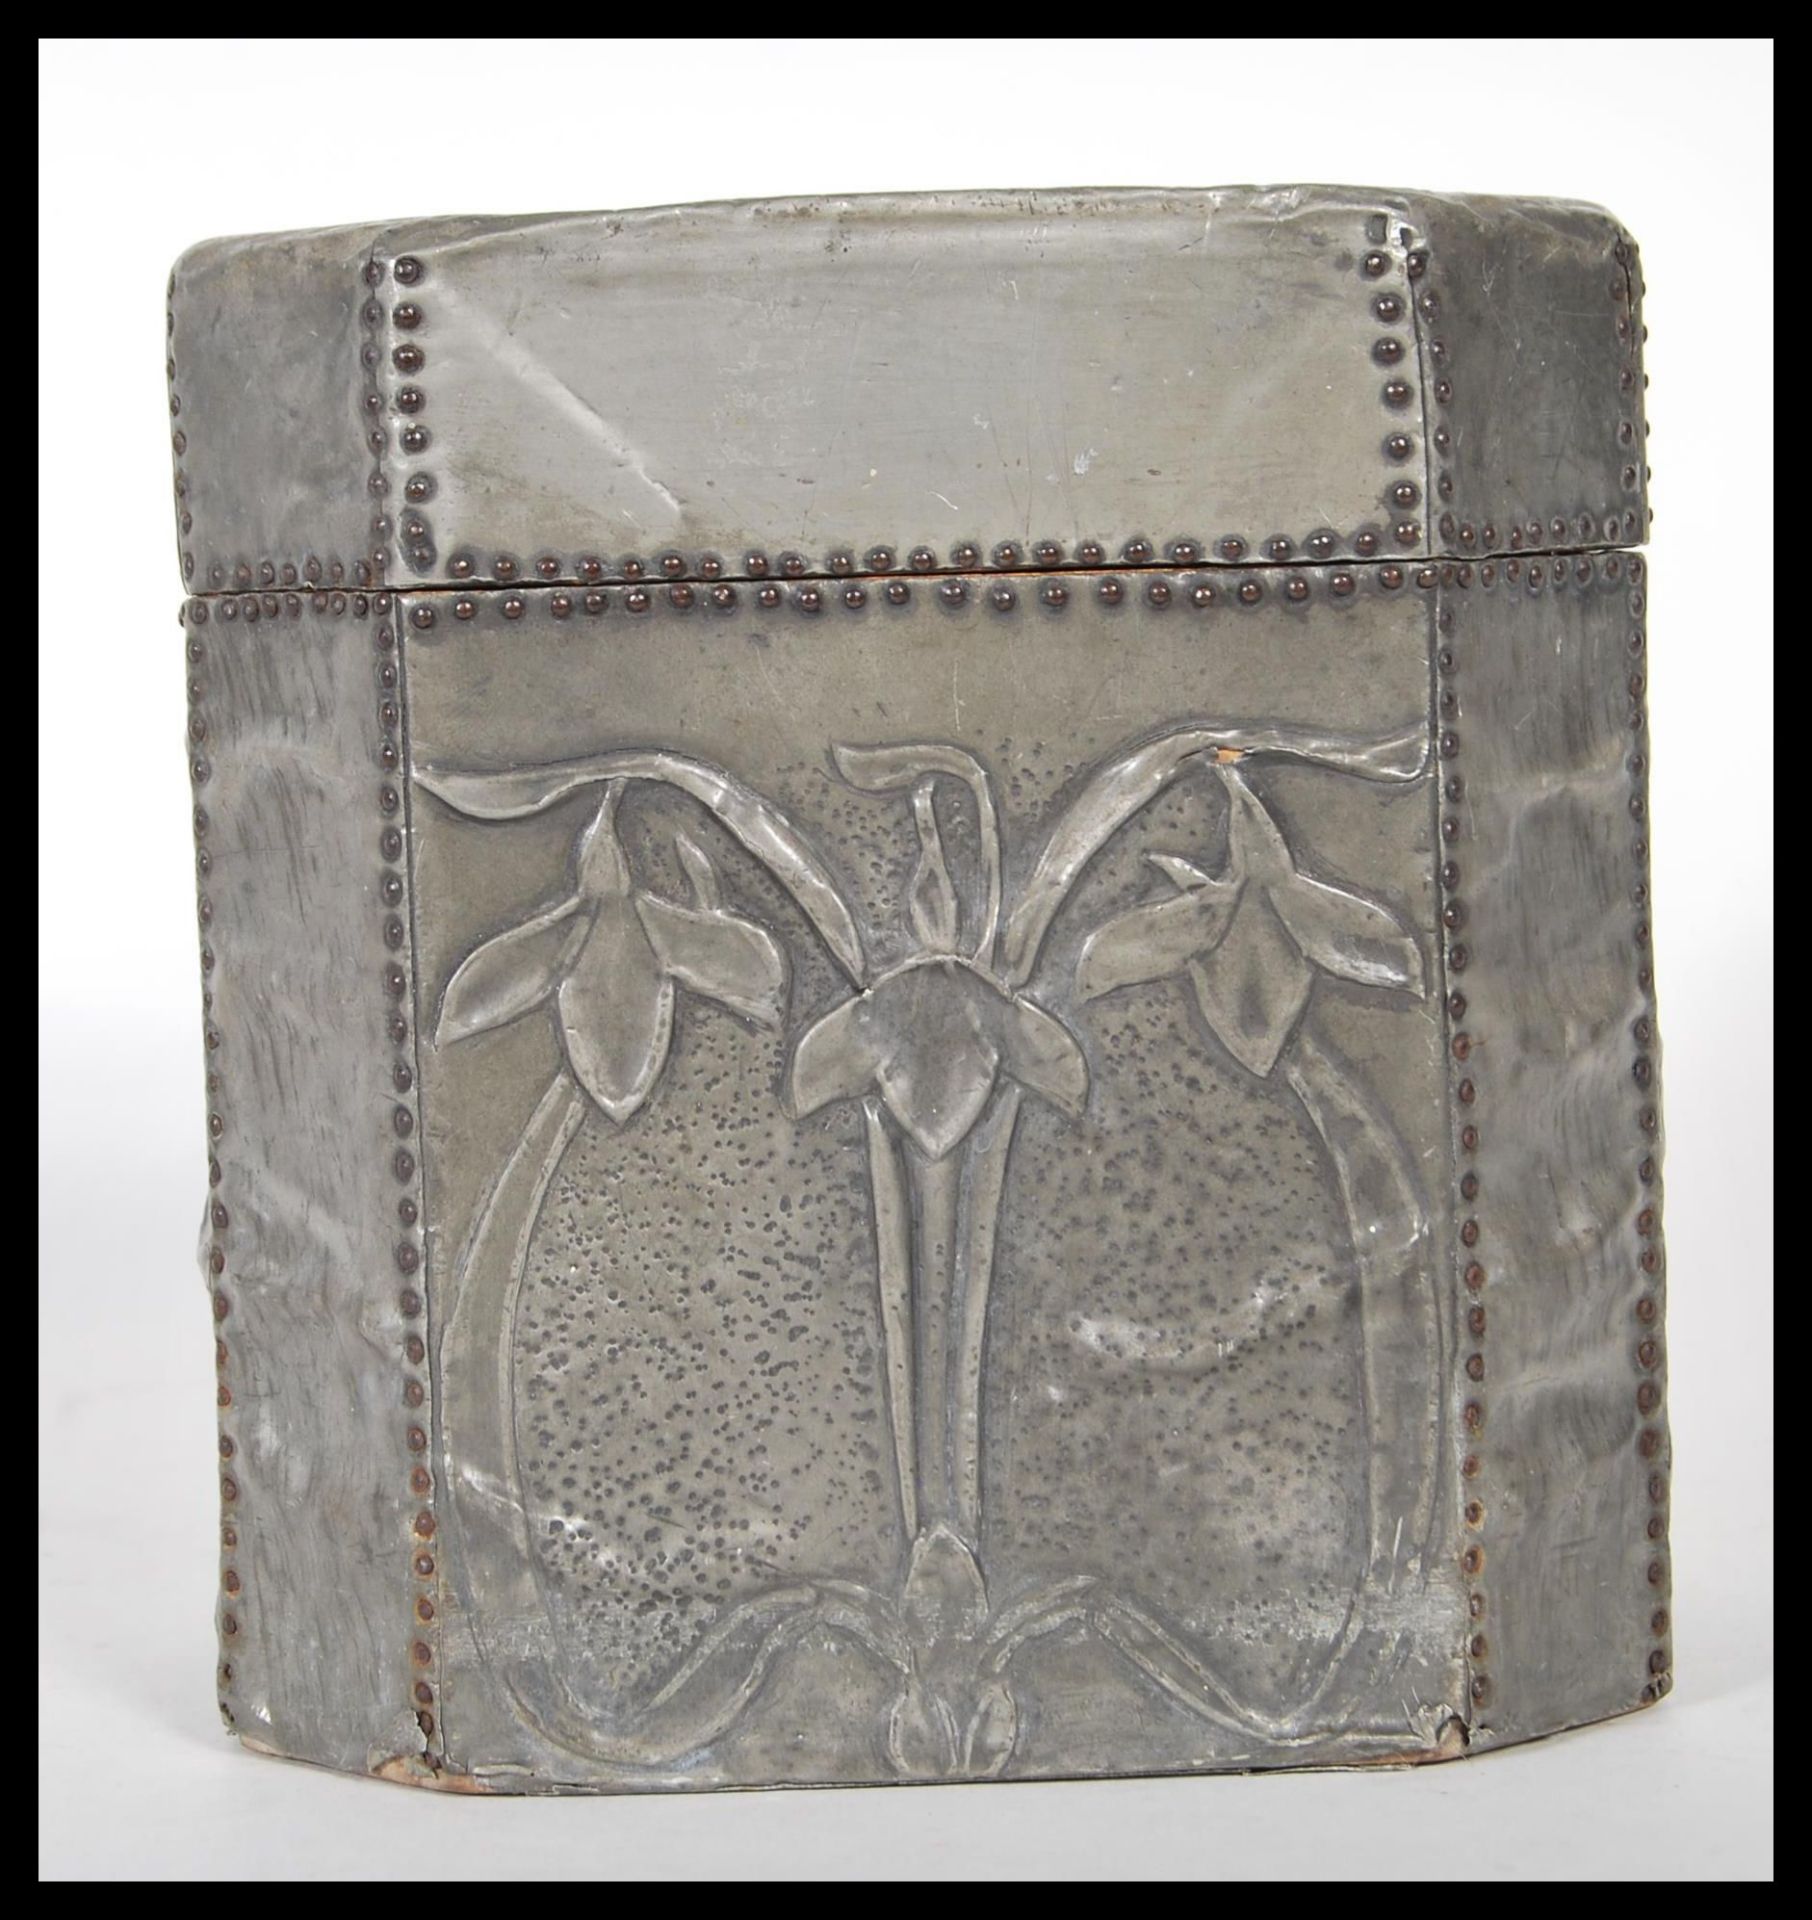 A late 19th century Arts and Crafts hammered pewter bound octagonal wooden tea caddy with hinged